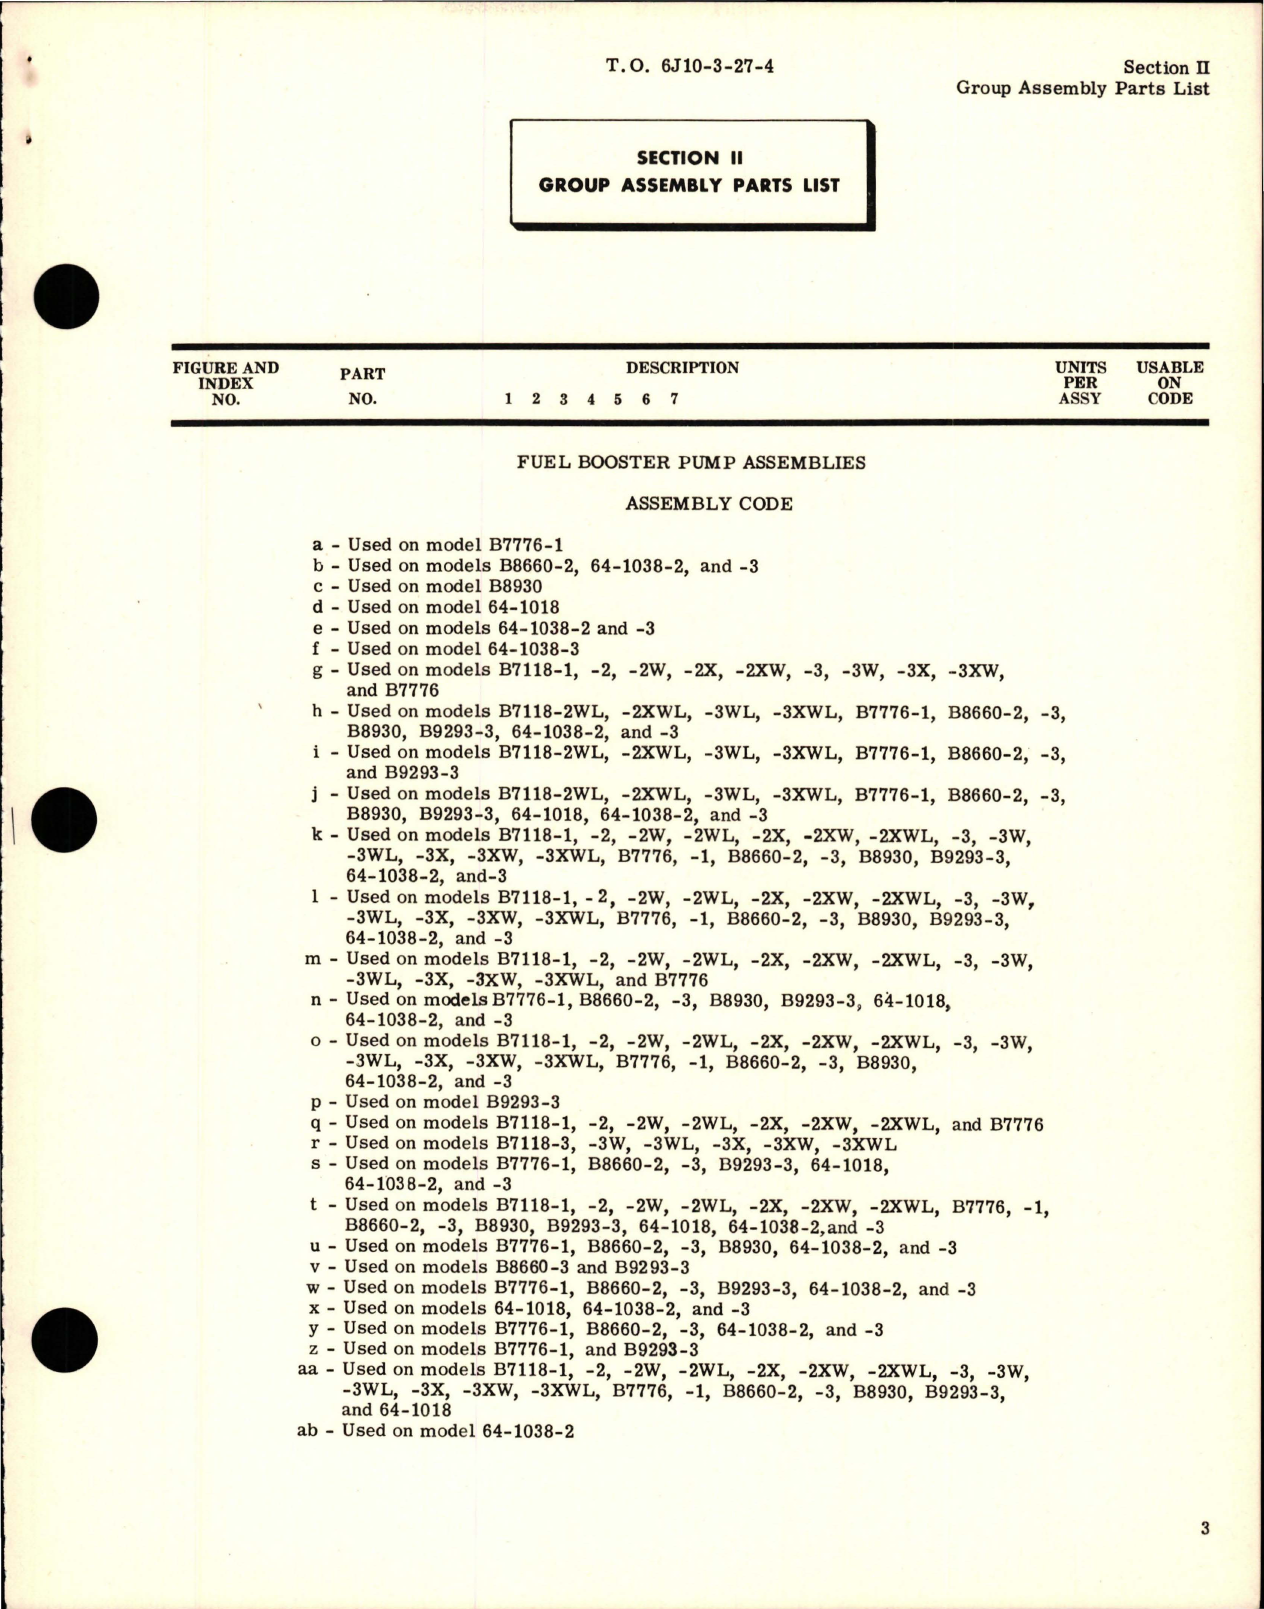 Sample page 5 from AirCorps Library document: Illustrated Parts Breakdown for Fuel Booster Pumps